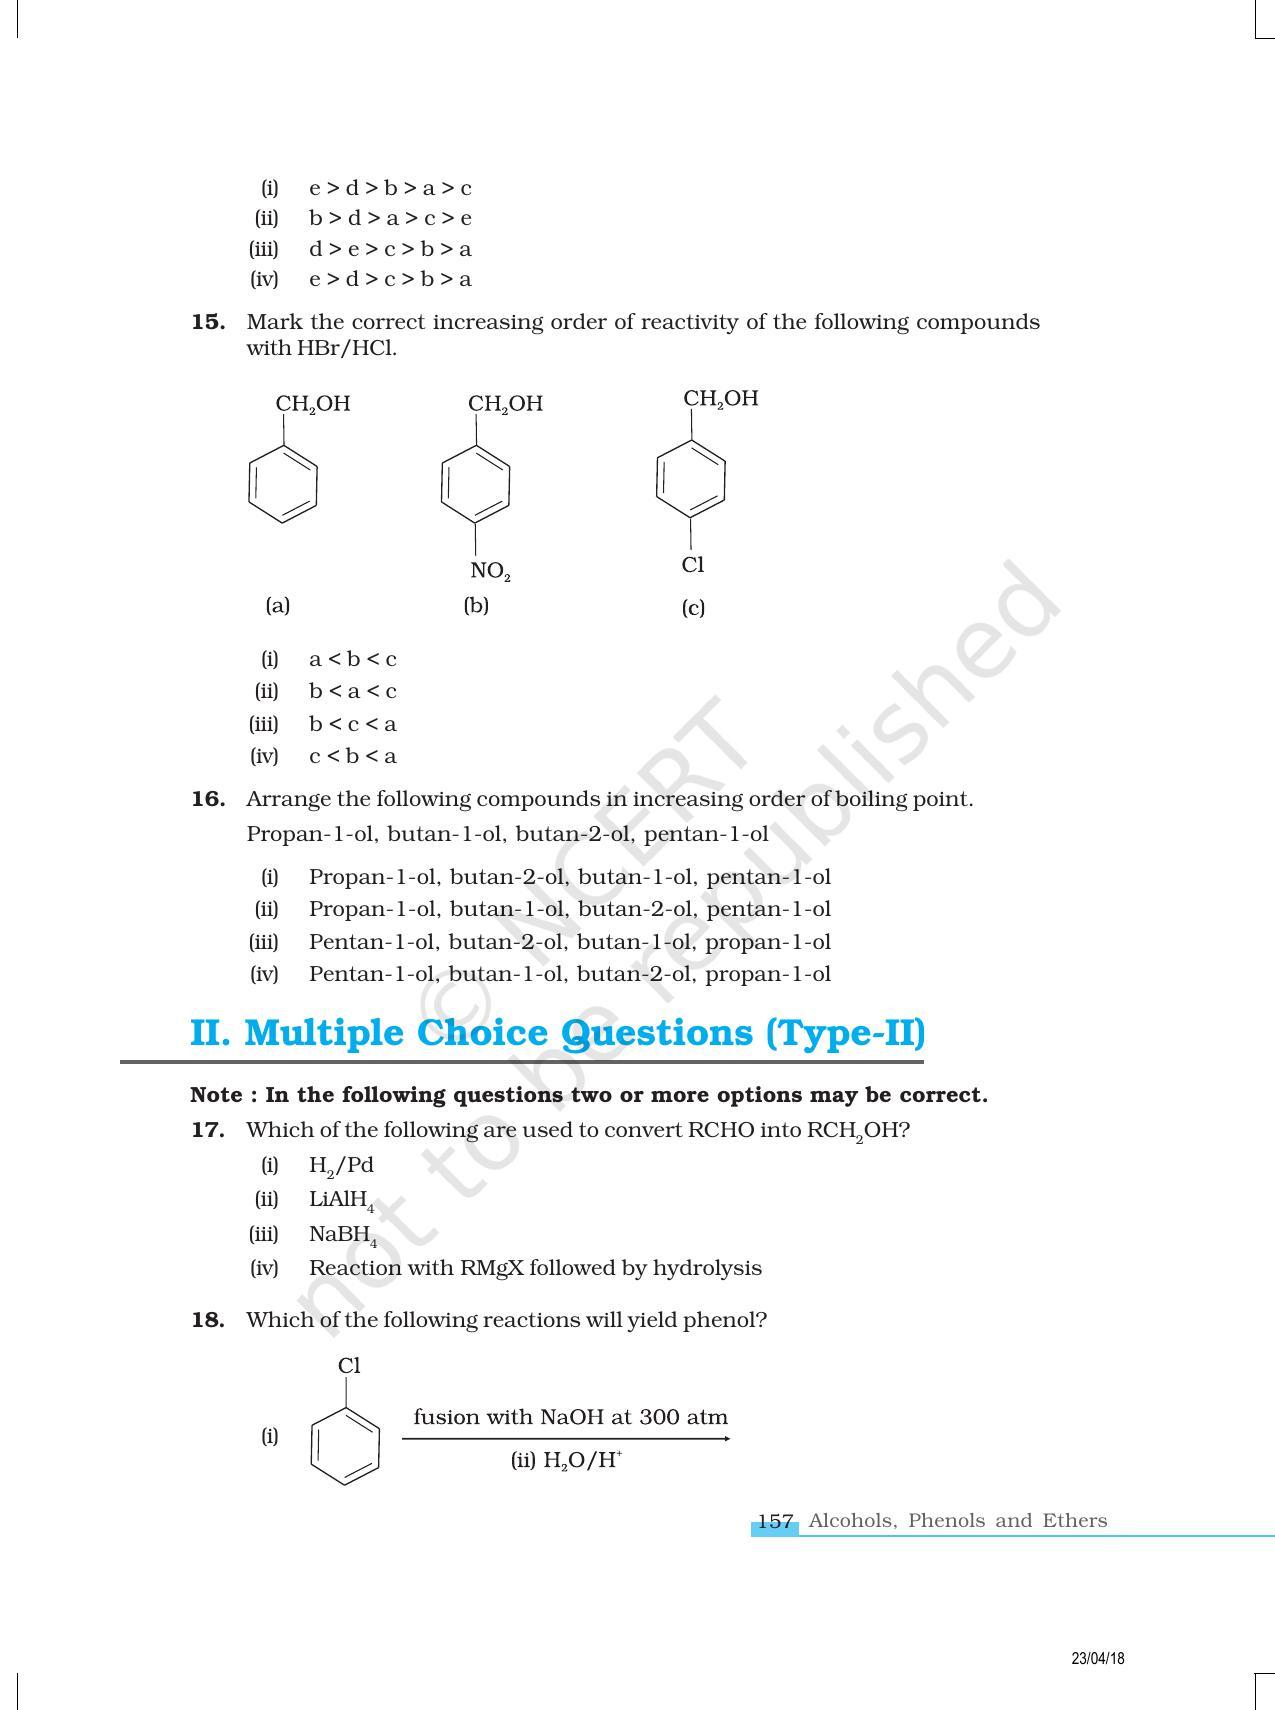 NCERT Exemplar Book for Class 12 Chemistry: Chapter 11 Alcohols, Phenols and Ethers - Page 4